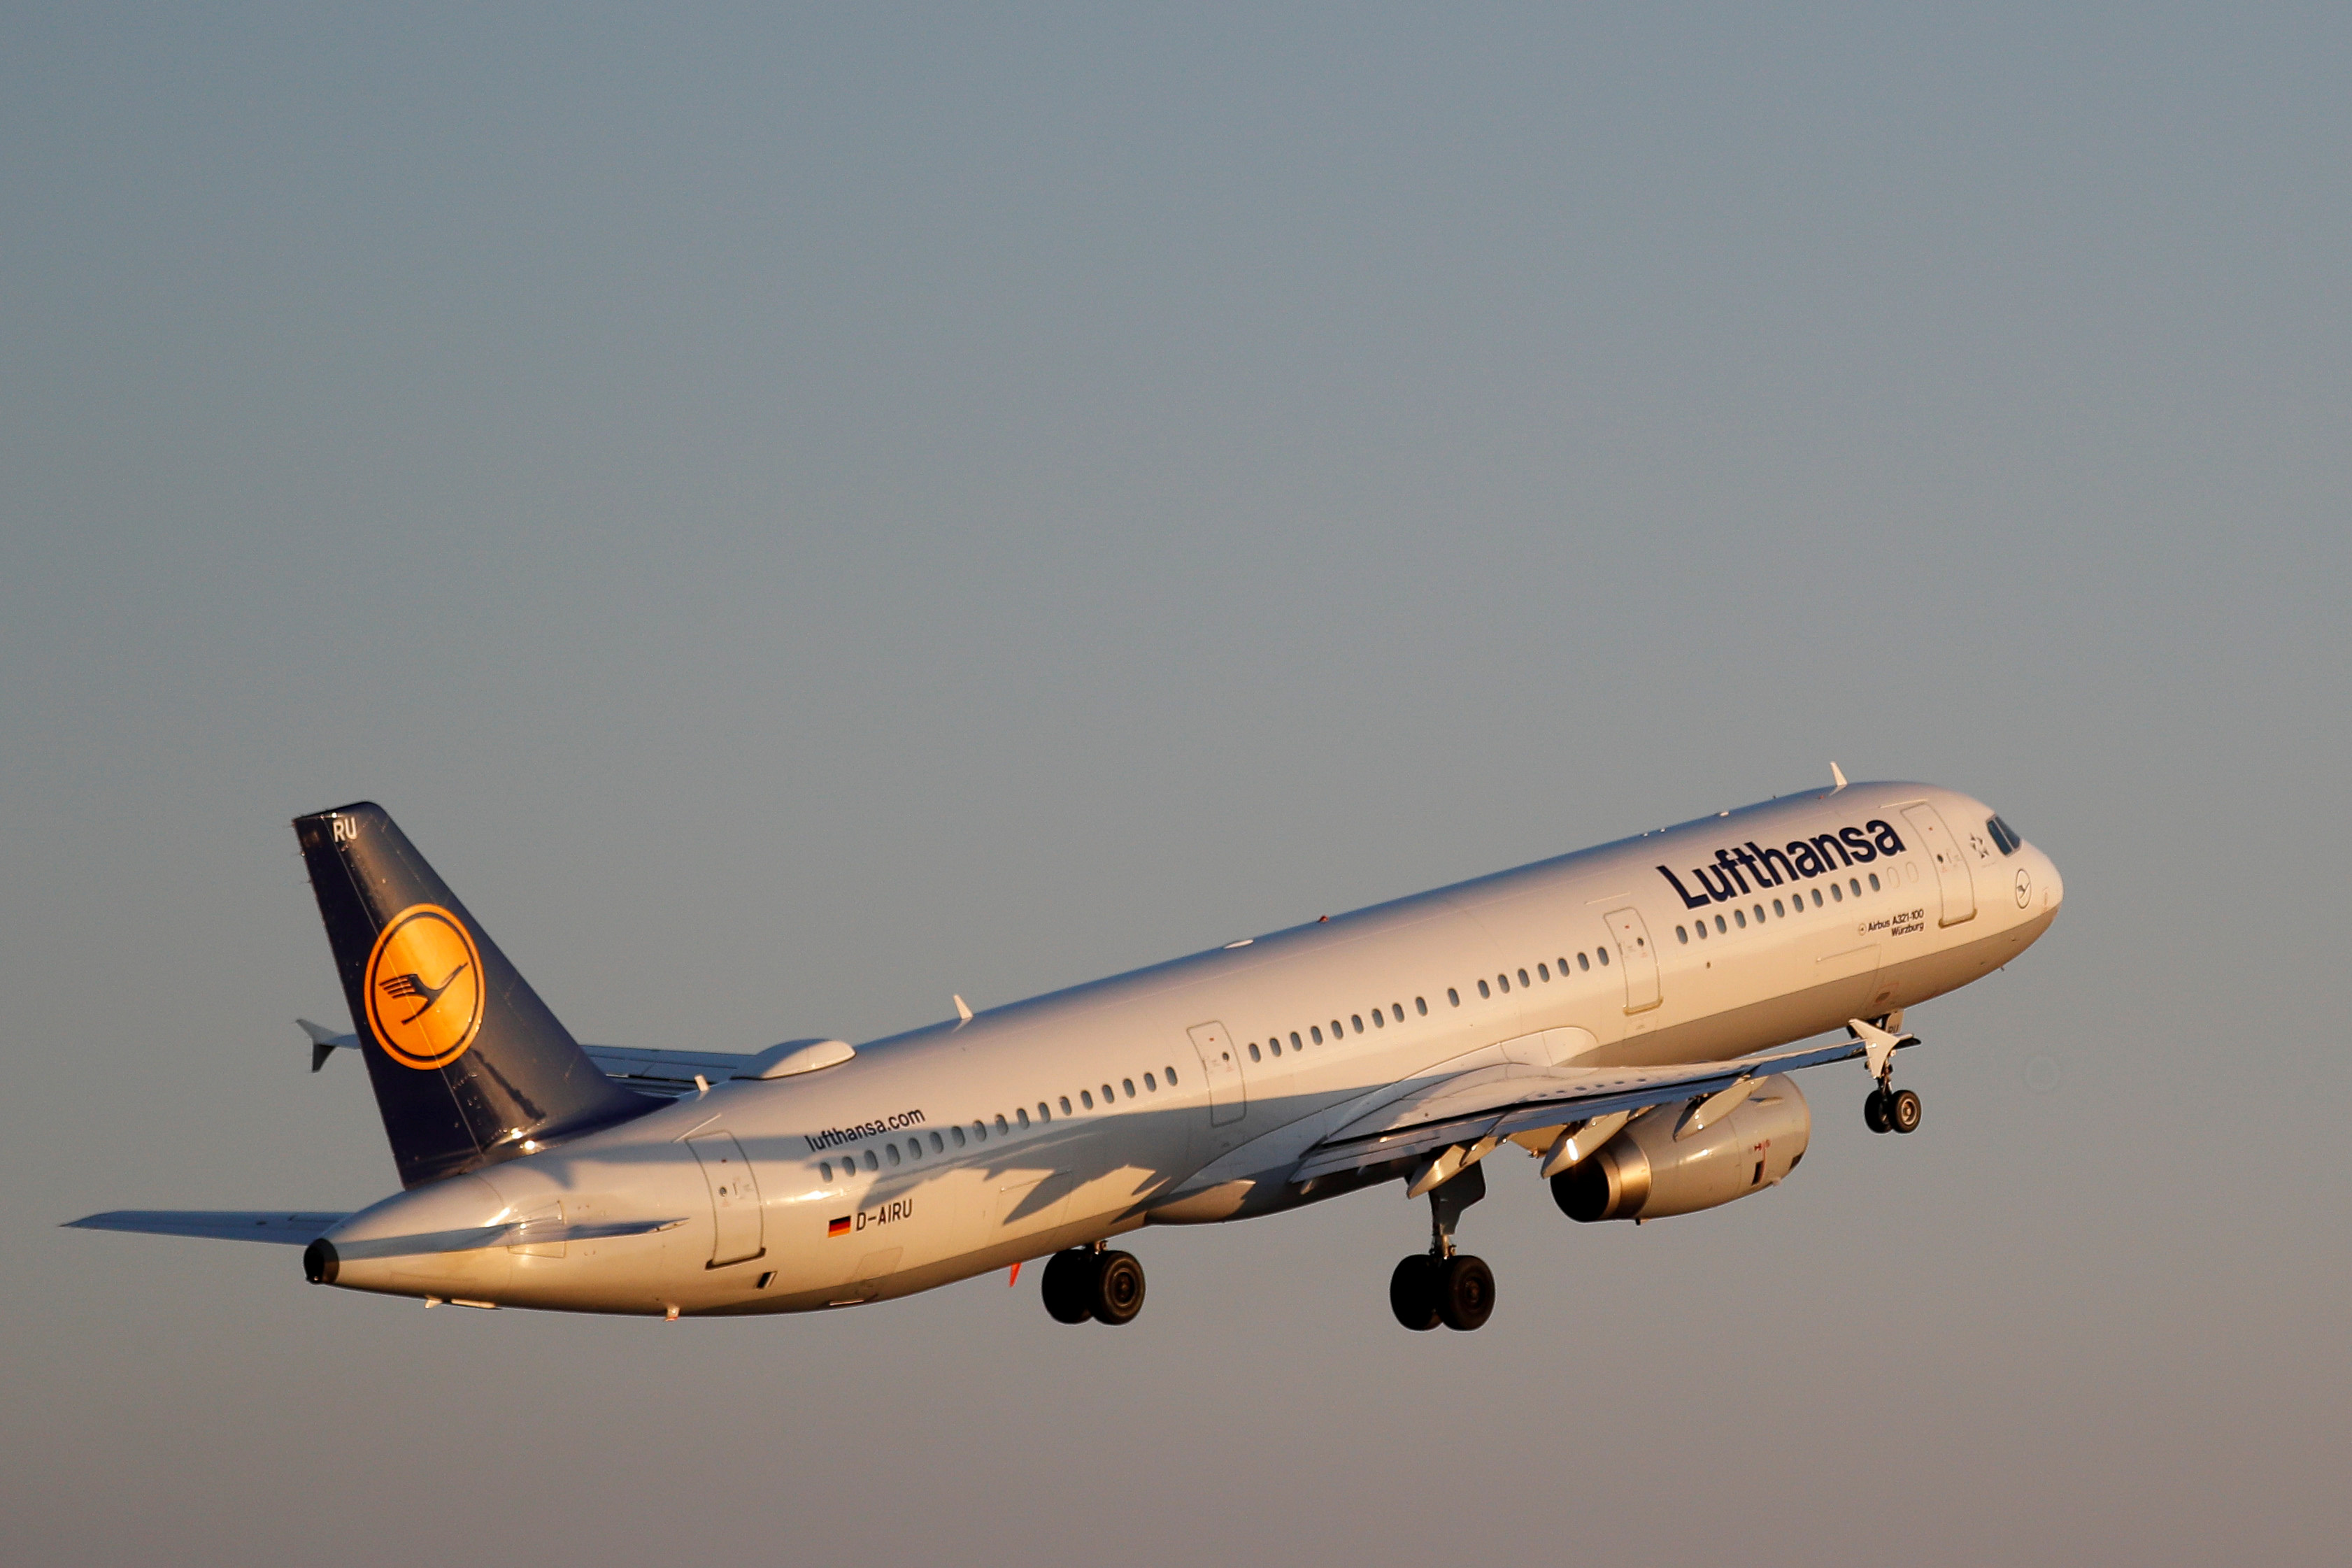 A Lufthansa AIrbus A321 airplane takes off from the airport in Palma de Mallorca